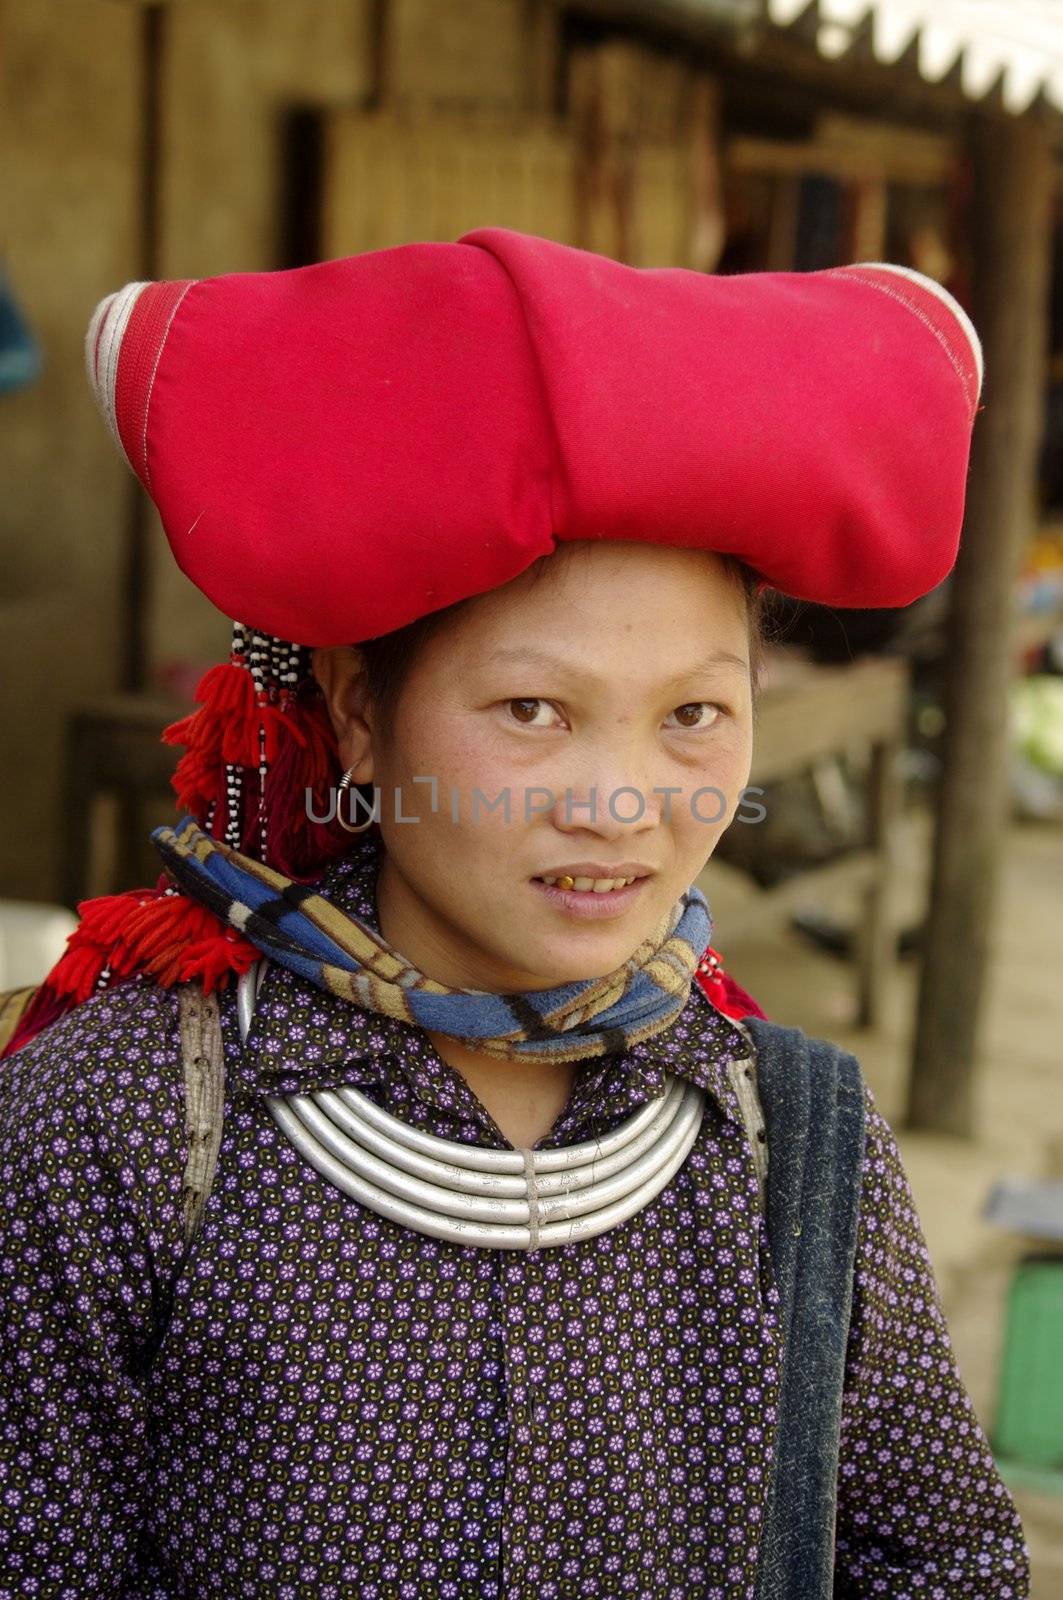 Red Dao ethnic  woman by Duroc